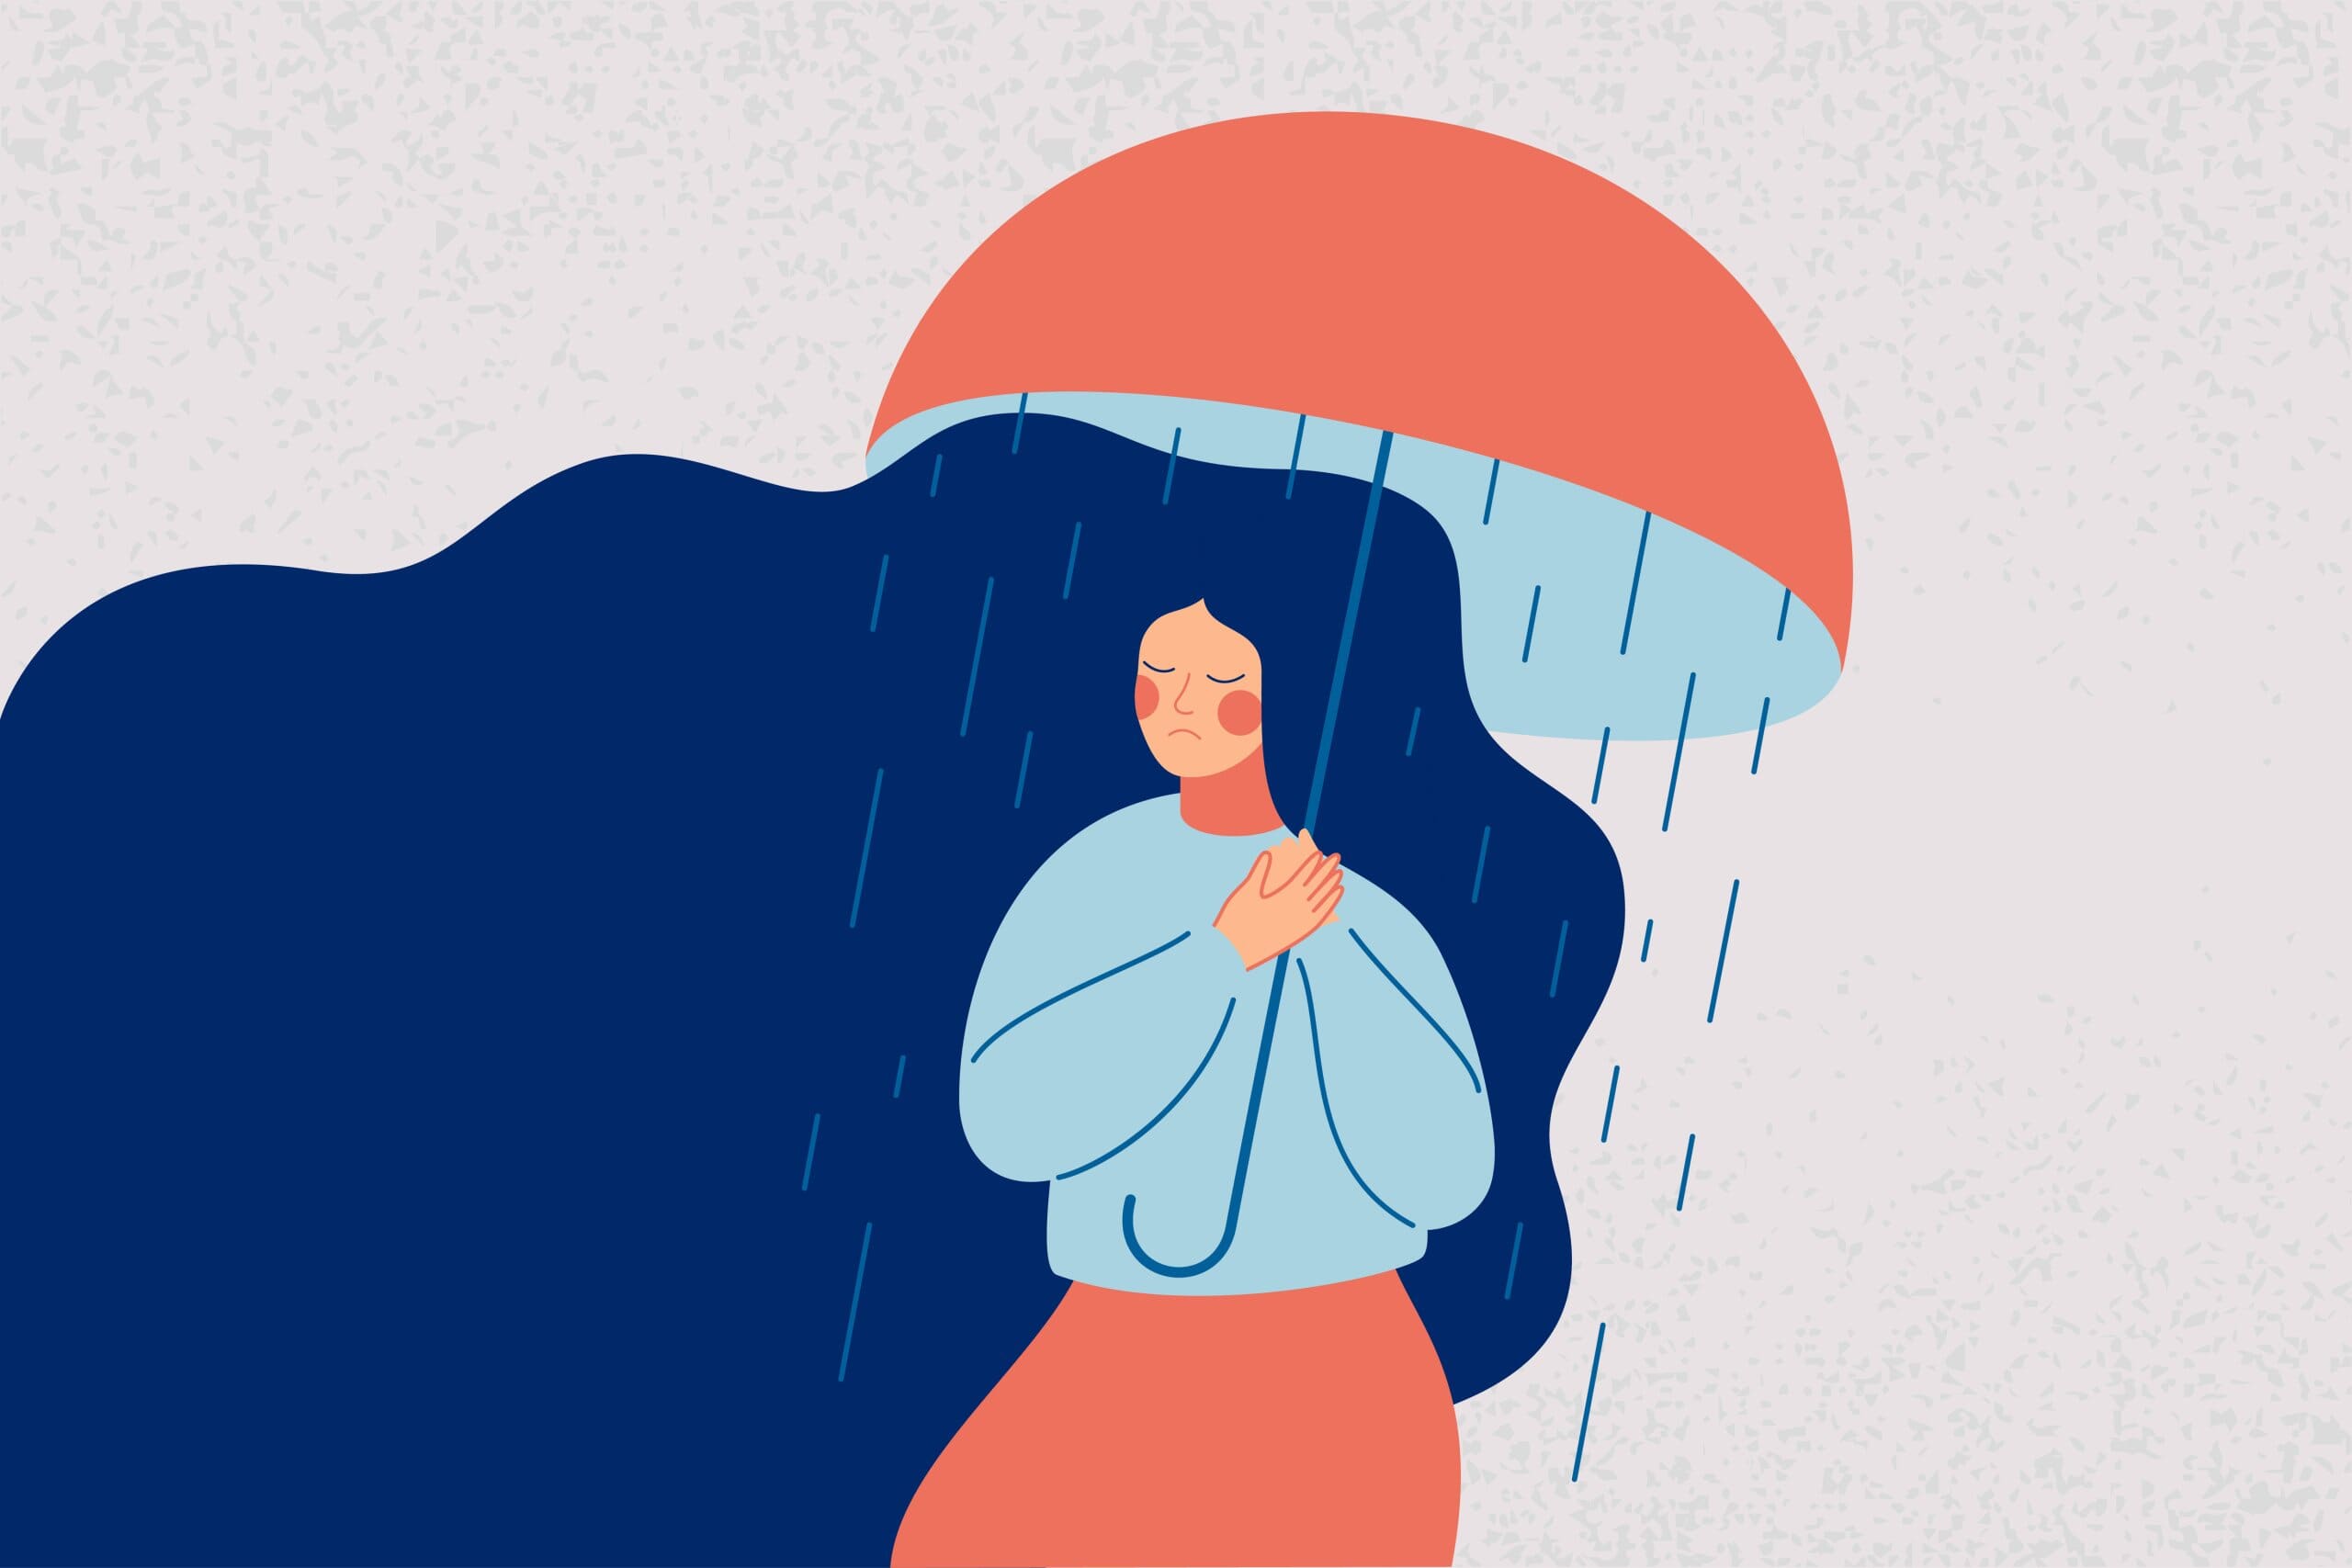 Cartoon image of a sad woman holding an umbrella. Rain is falling on her from within the umbrella, representing an inner sadness.